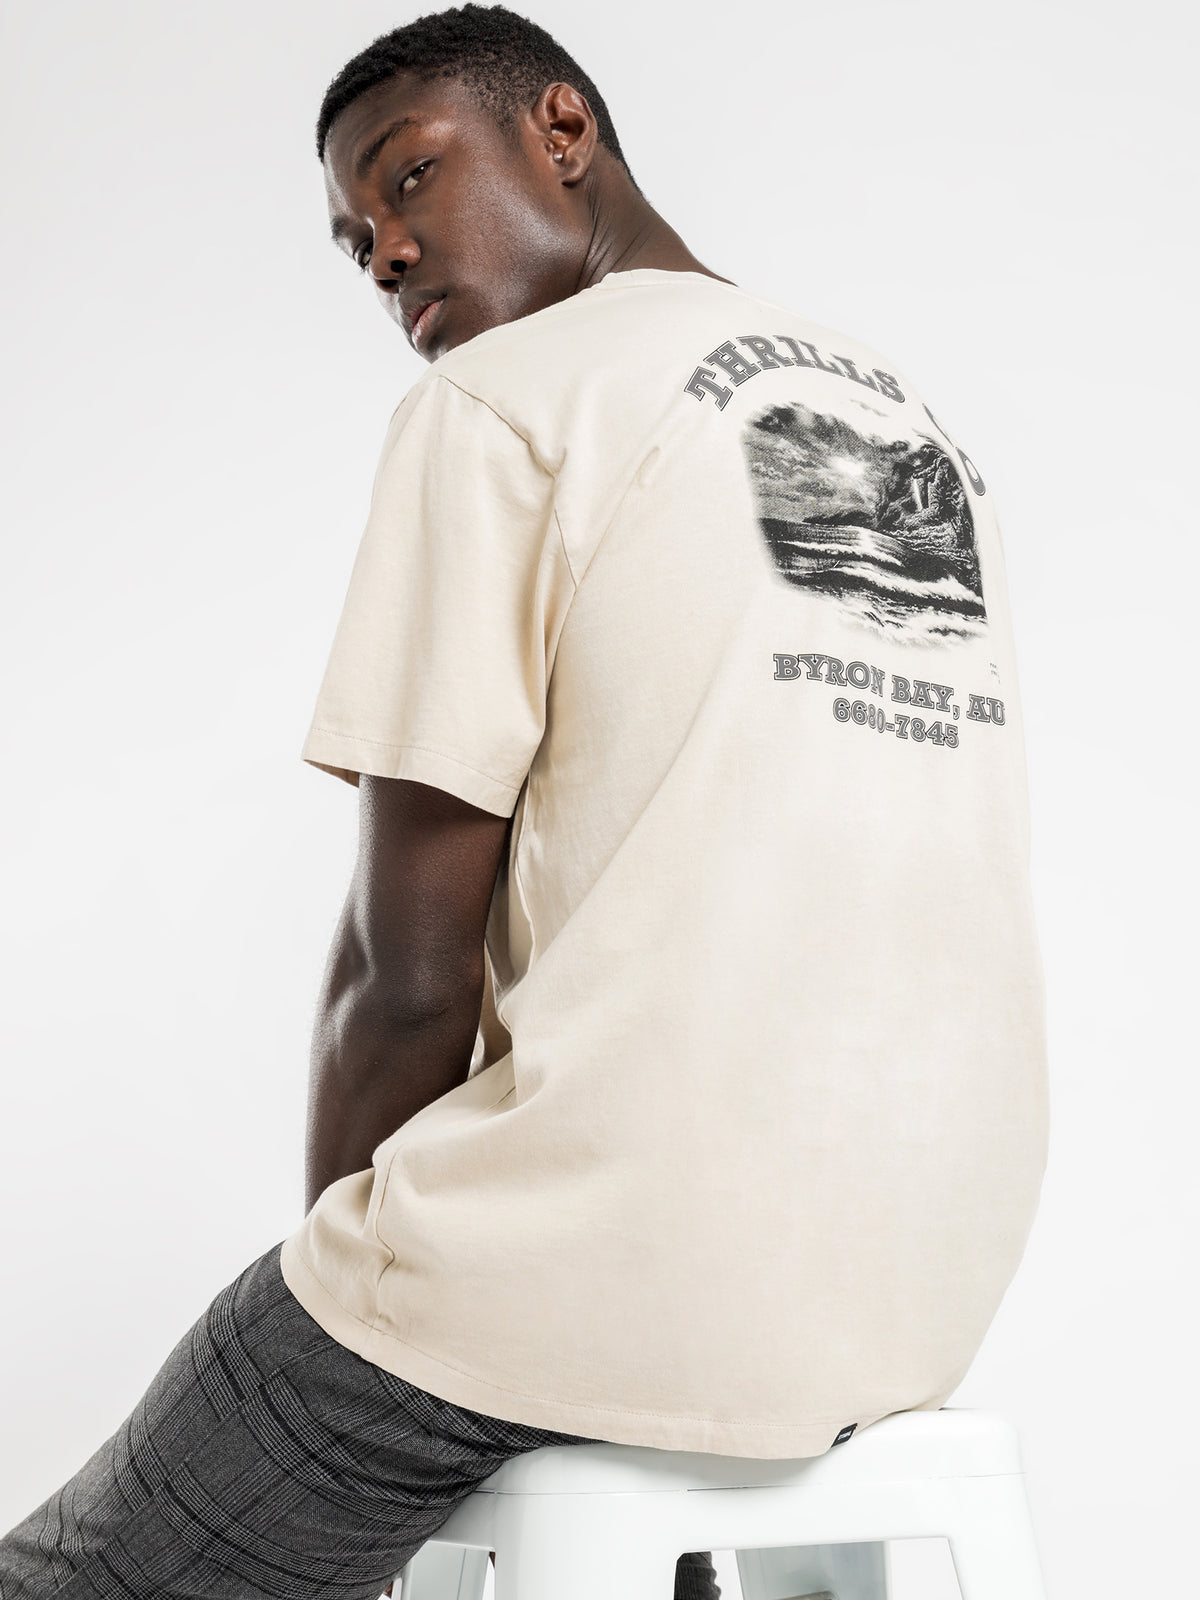 Electric Eagle Short Sleeve T-Shirt in Thrift White